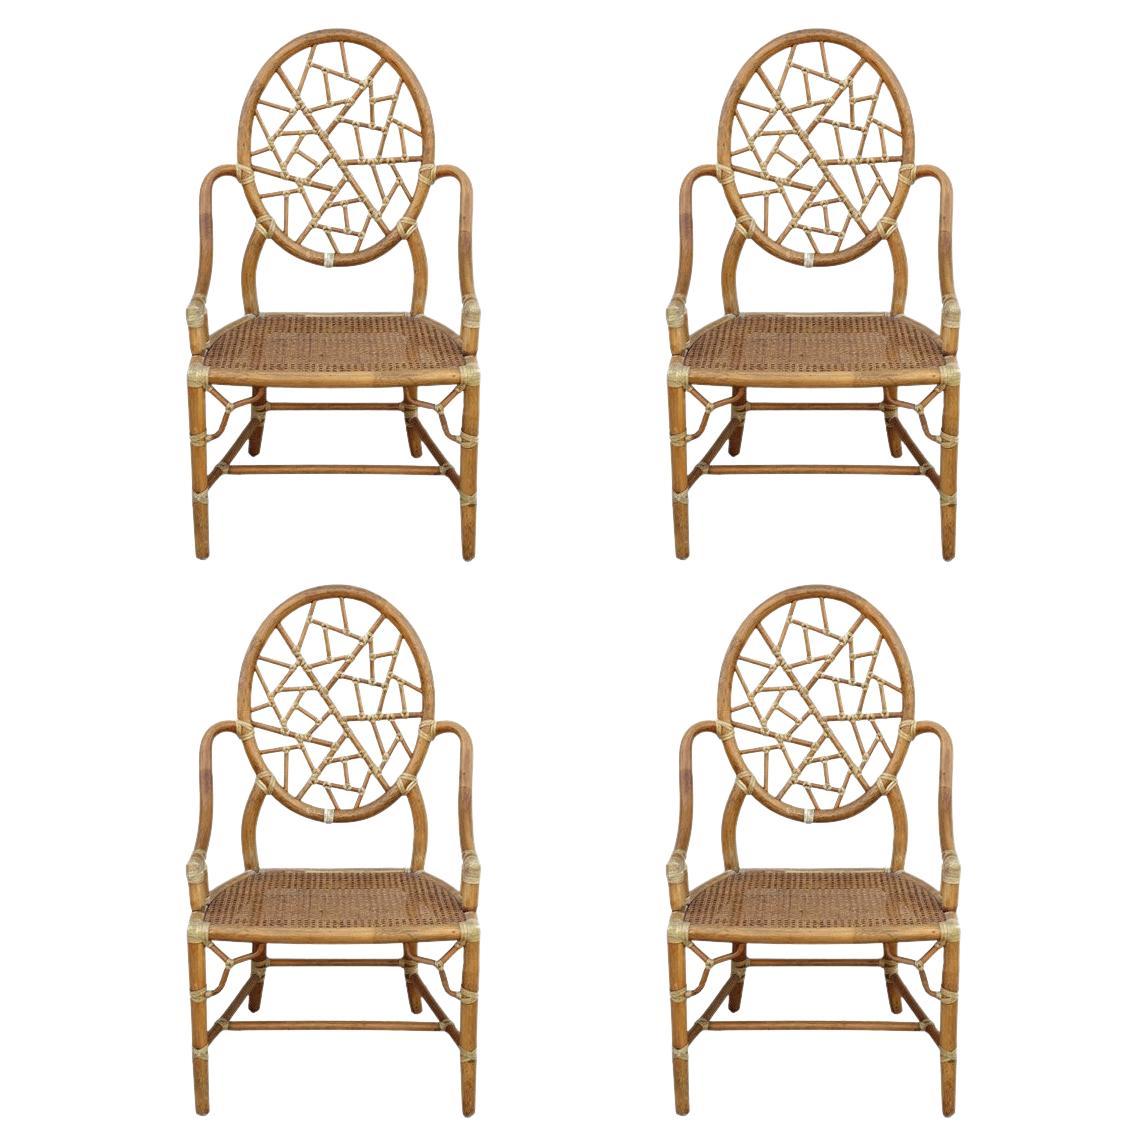 Elinor McGuire Iconic Cracked Ice Dining Chairs, Set of 4